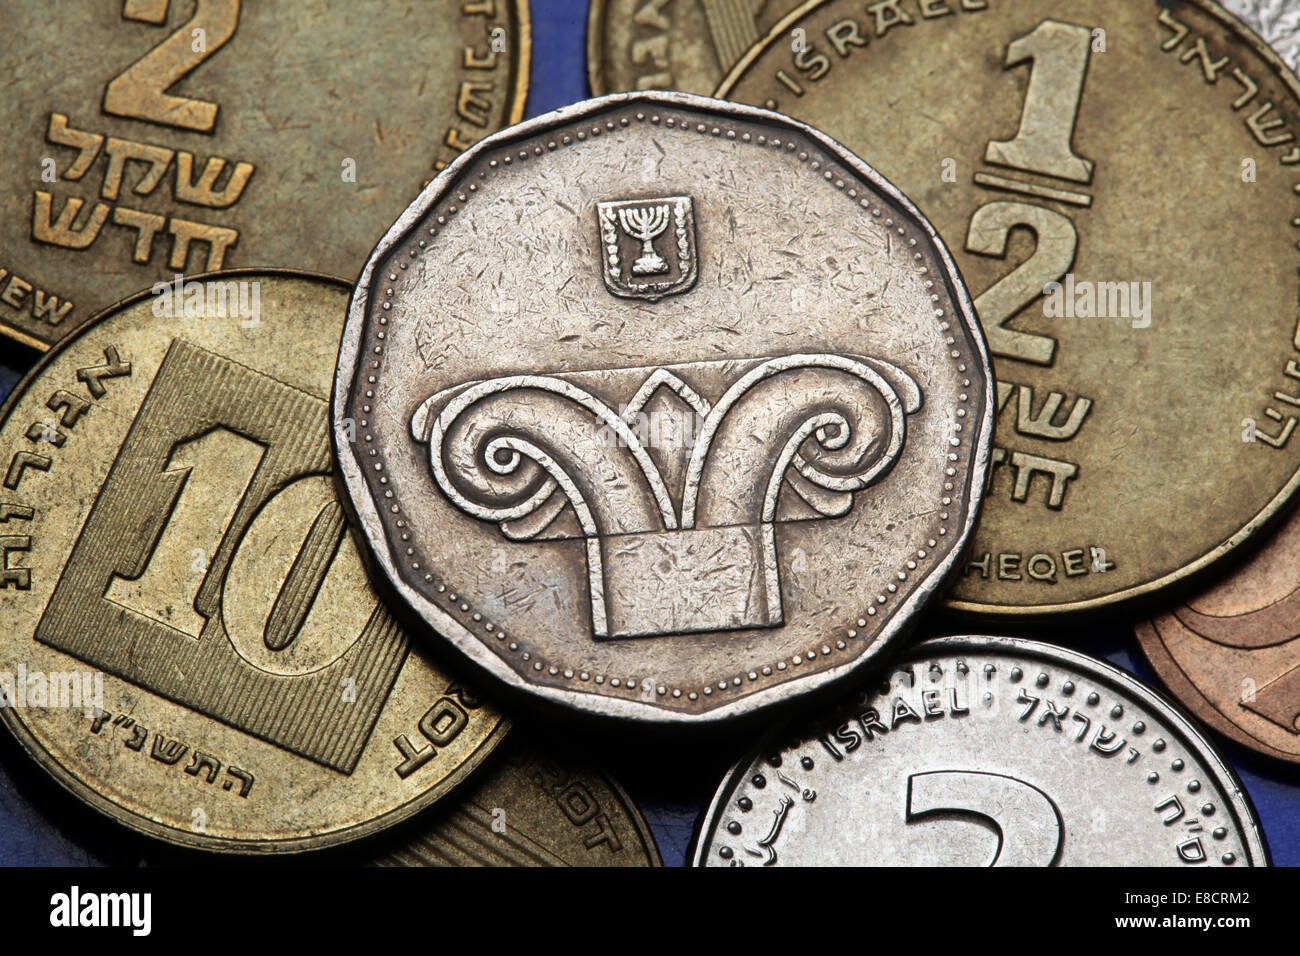 Coins Of Israel Ionic Capital Of Column Depicted In The Israeli Five New Shekels Coin Stock